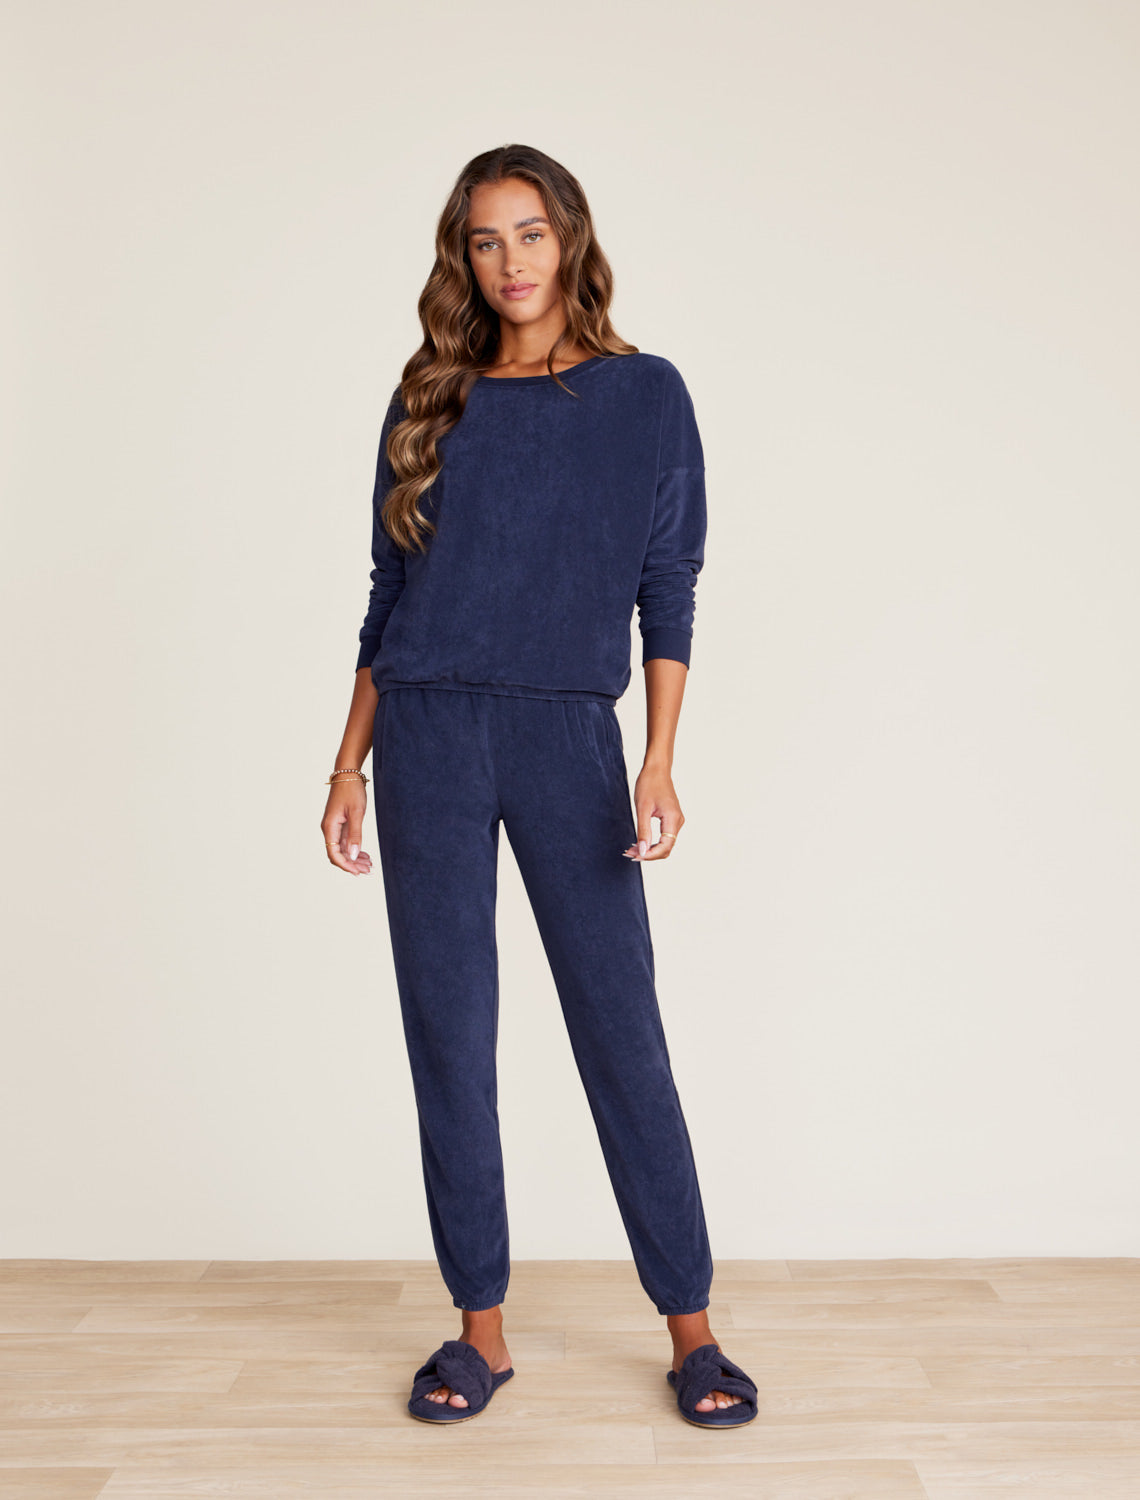 Barefoot Dreams, Ugg, and More Are on Sale in 's Loungewear Section